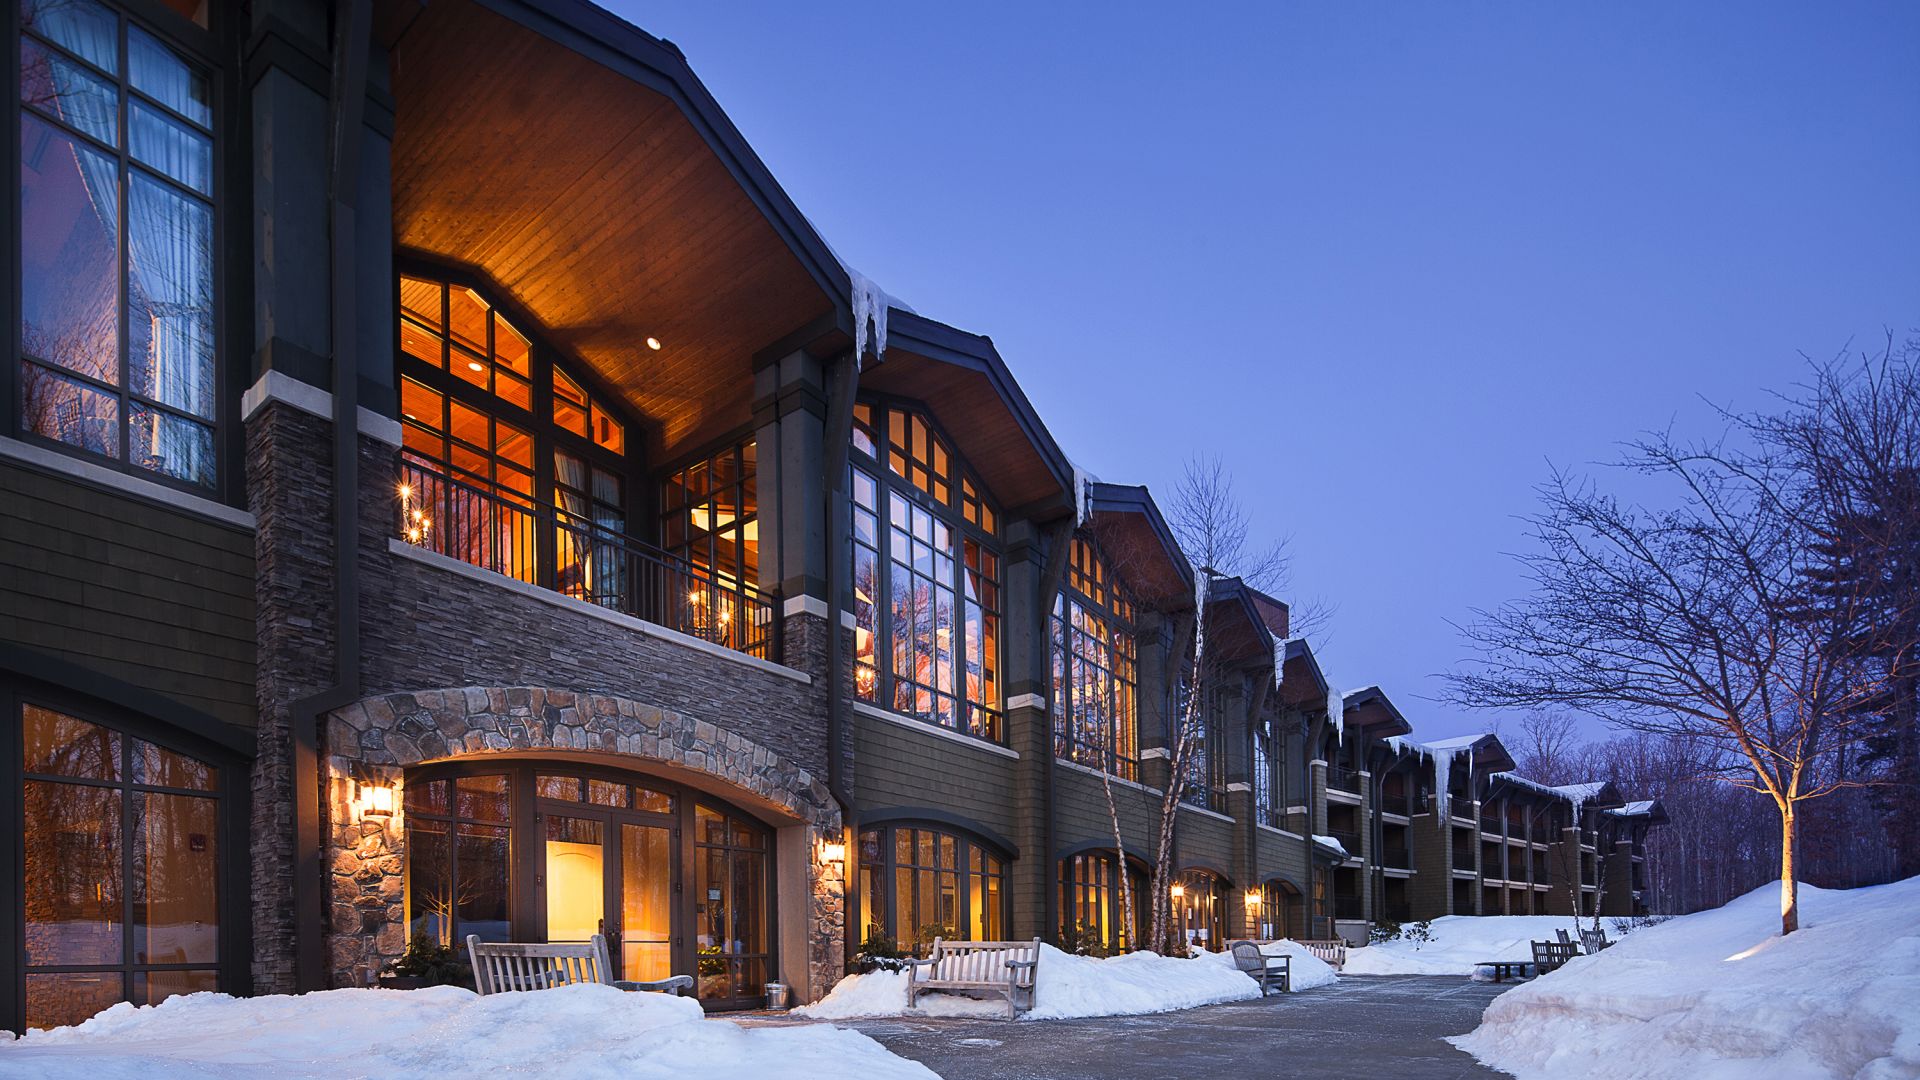 Back exterior view of The Lodge at Woodloch at dusk in Winter